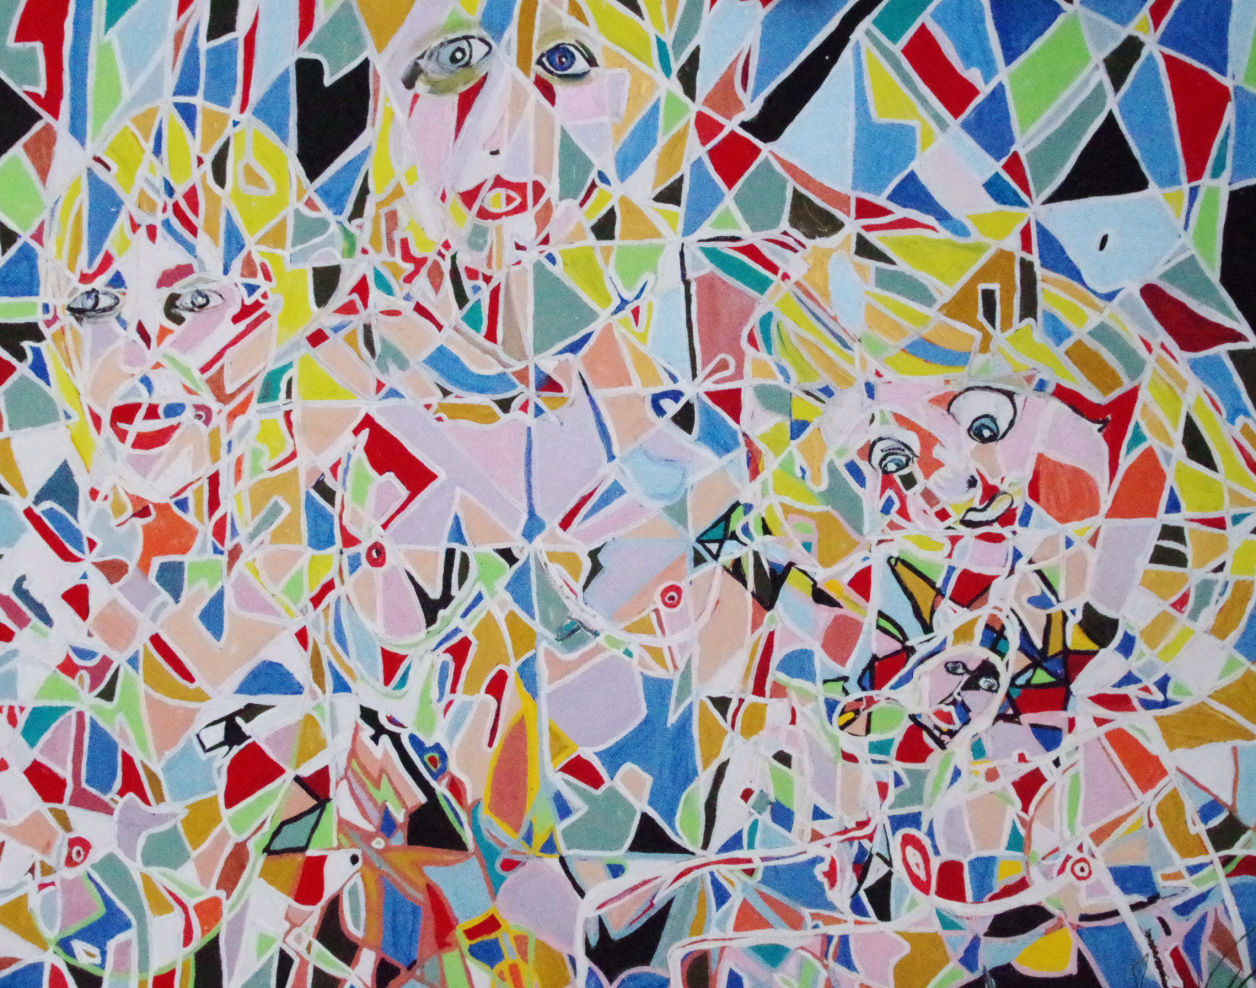 'Triangles' by BB Bango based 48 by 48 inch acrylic on canvas. Sold to art collector in UK